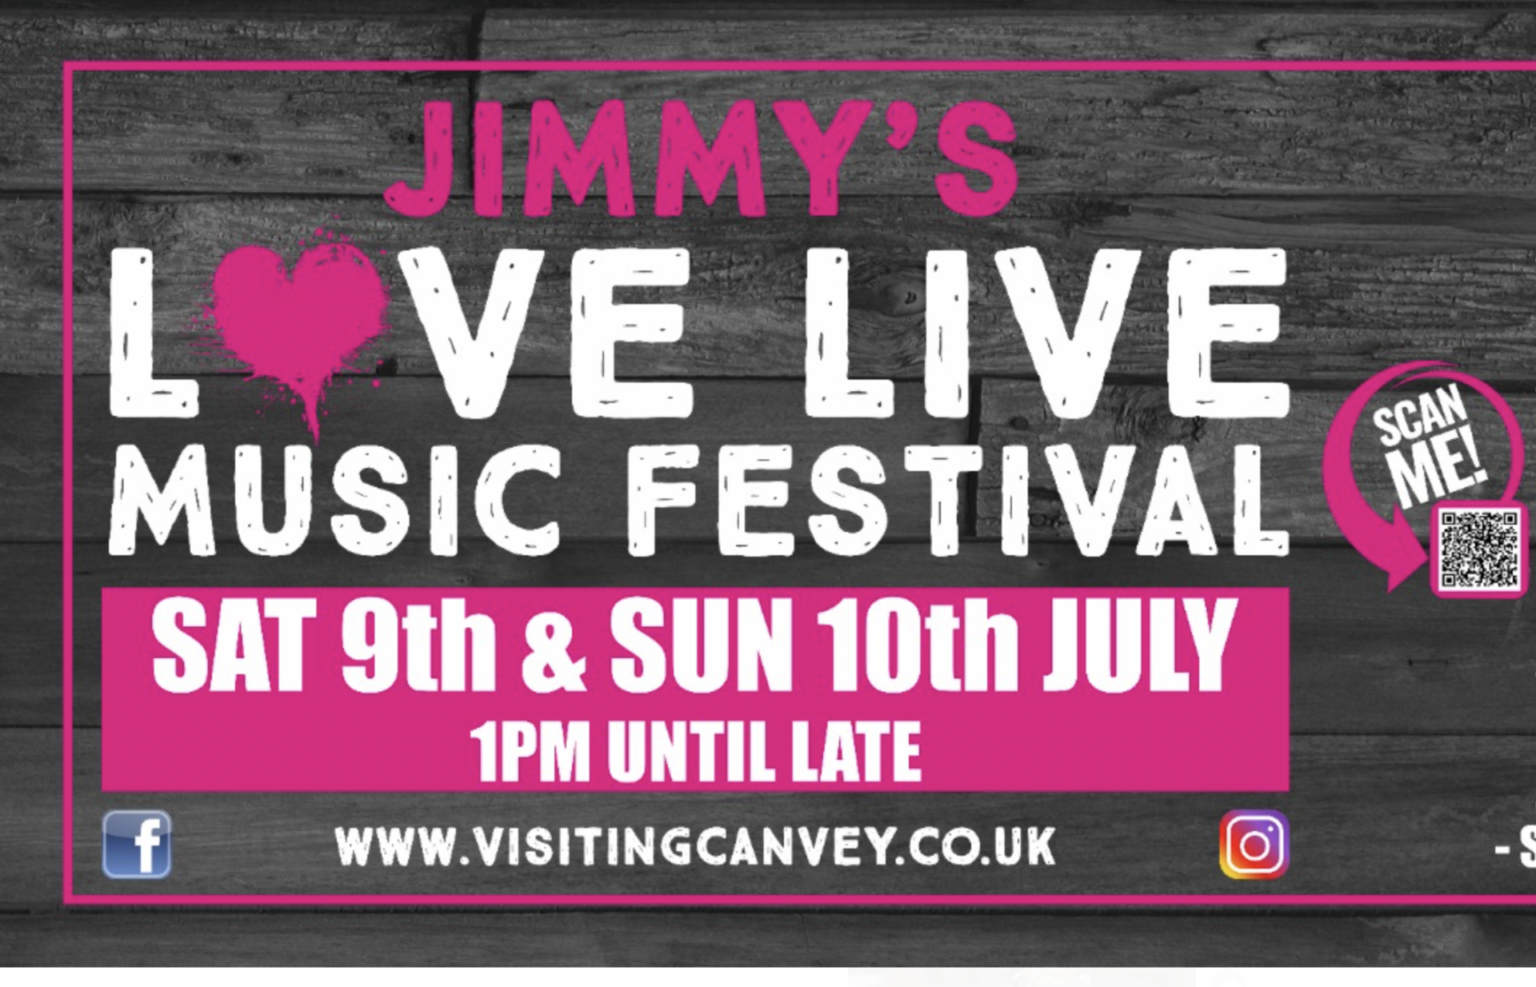 Jimmy Mac's Music Festival 9th July Visiting Canvey Island